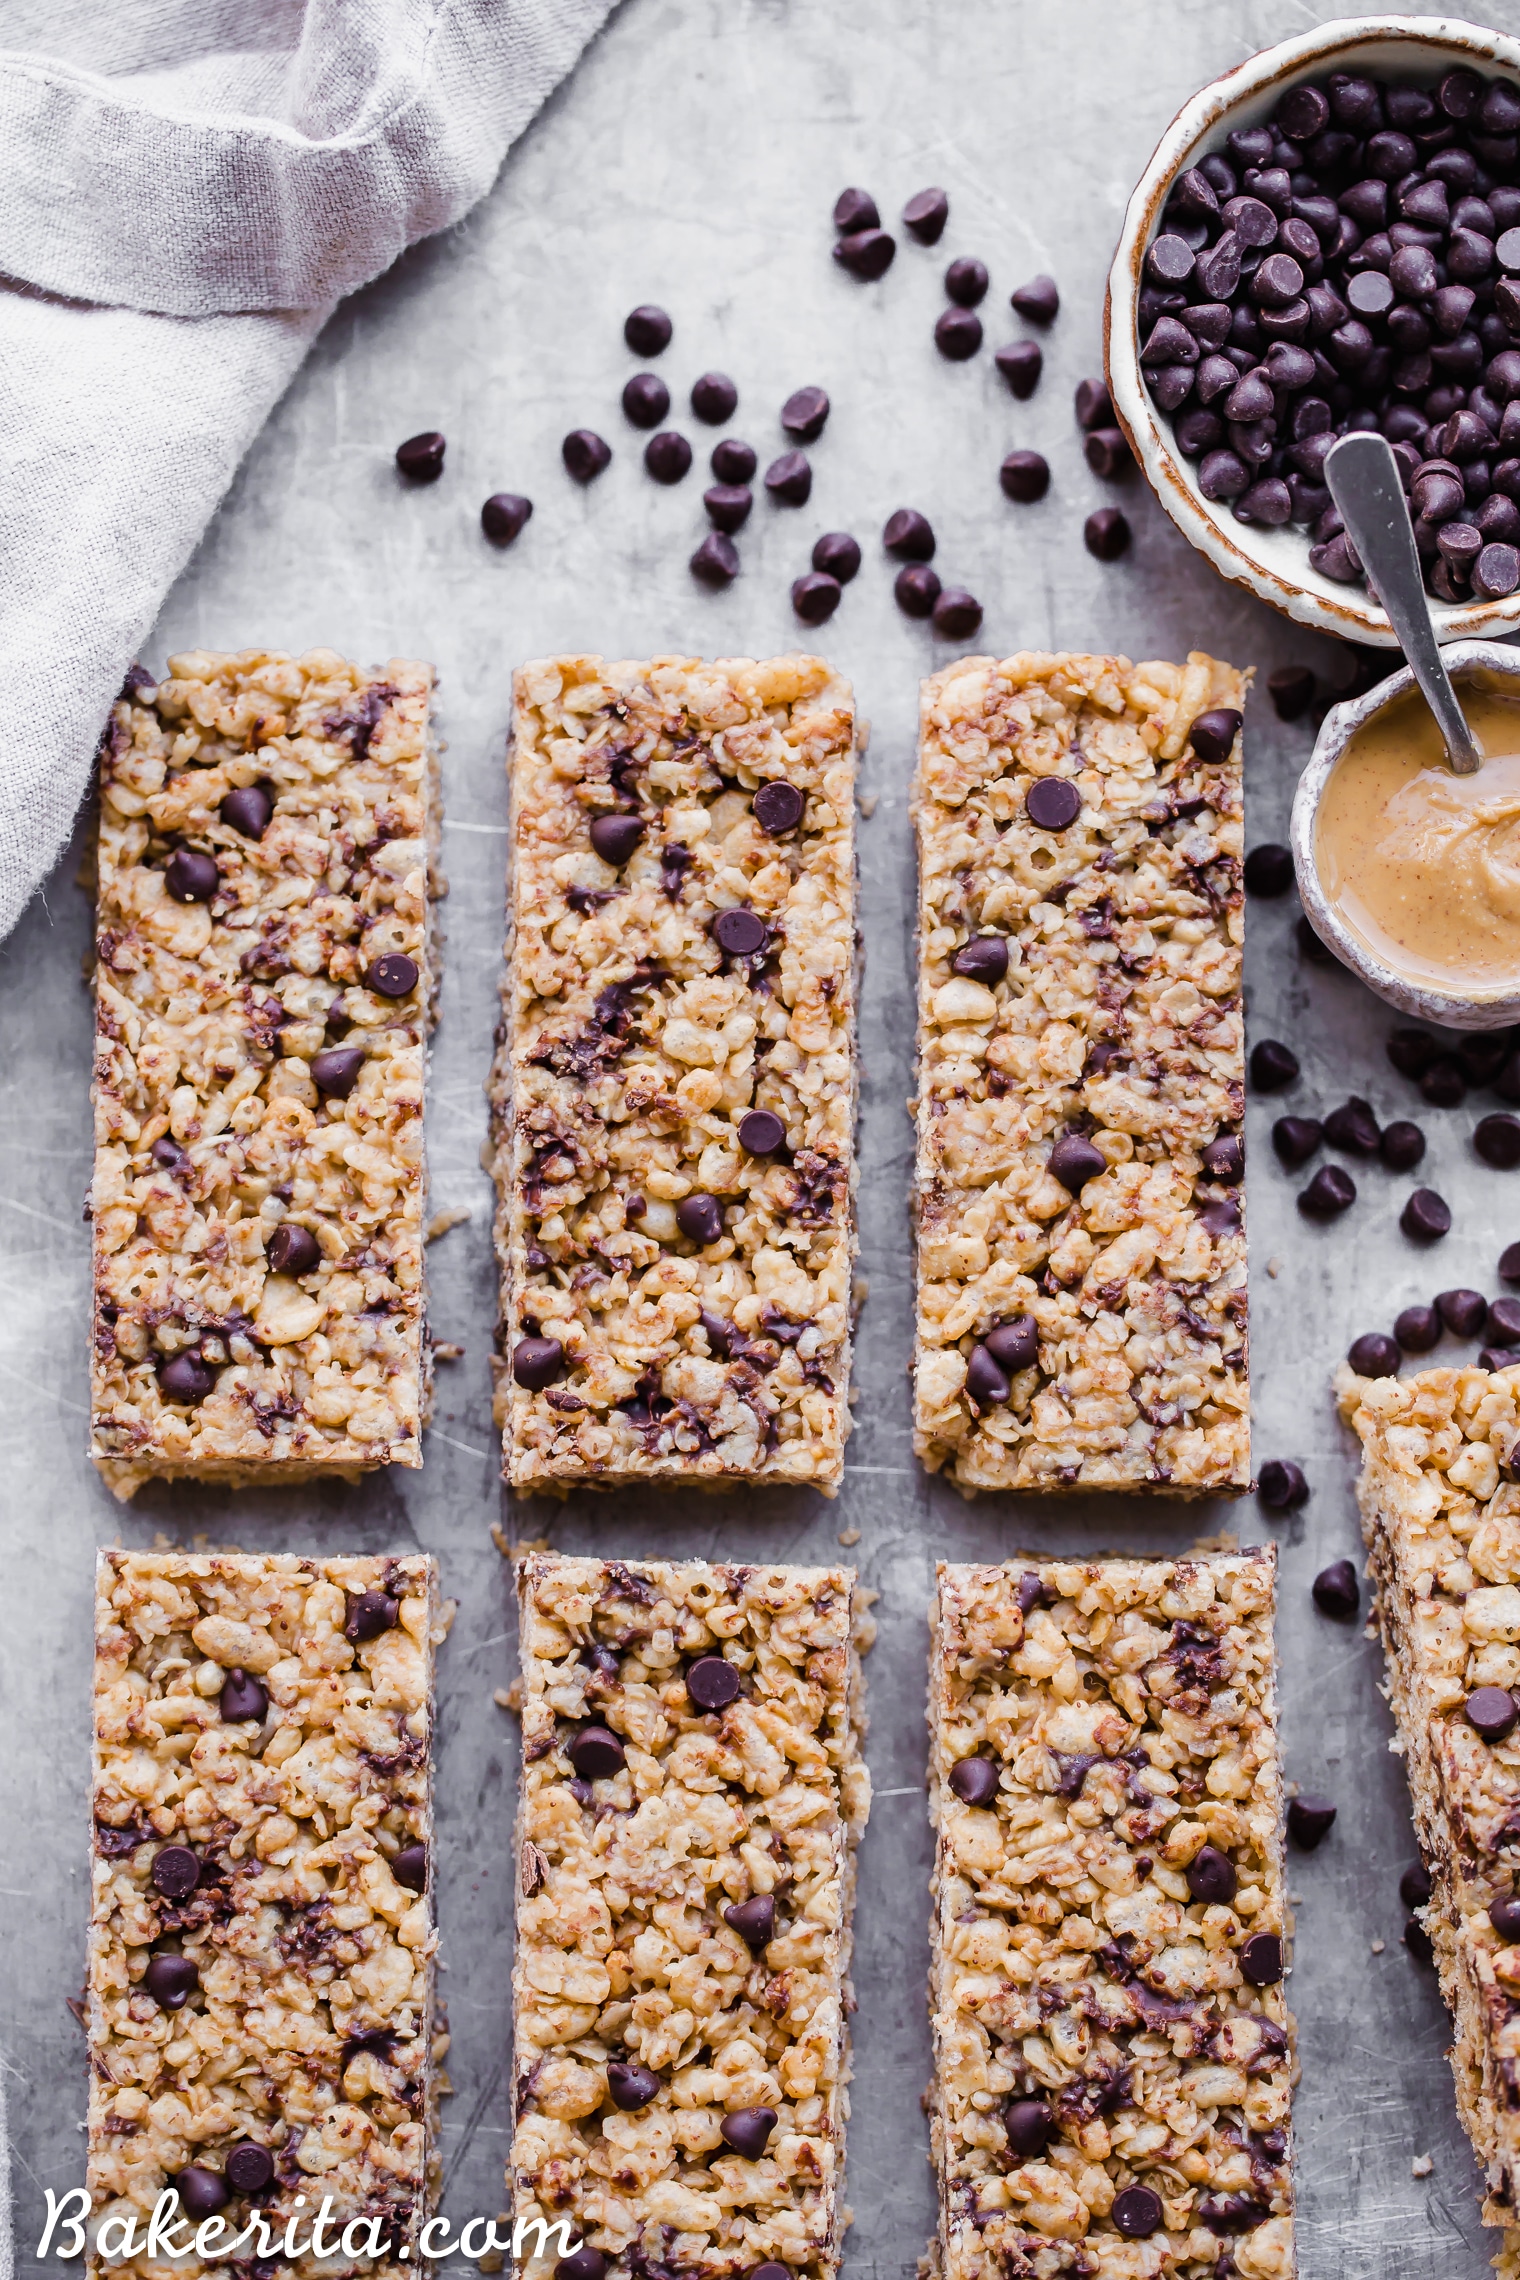 These Peanut Butter Chocolate Chip Chewy Bars will bring you right back to your favorite childhood snack! This homemade, no-bake version is way more delicious with a short and simple ingredients list. They're gluten-free and vegan, too!